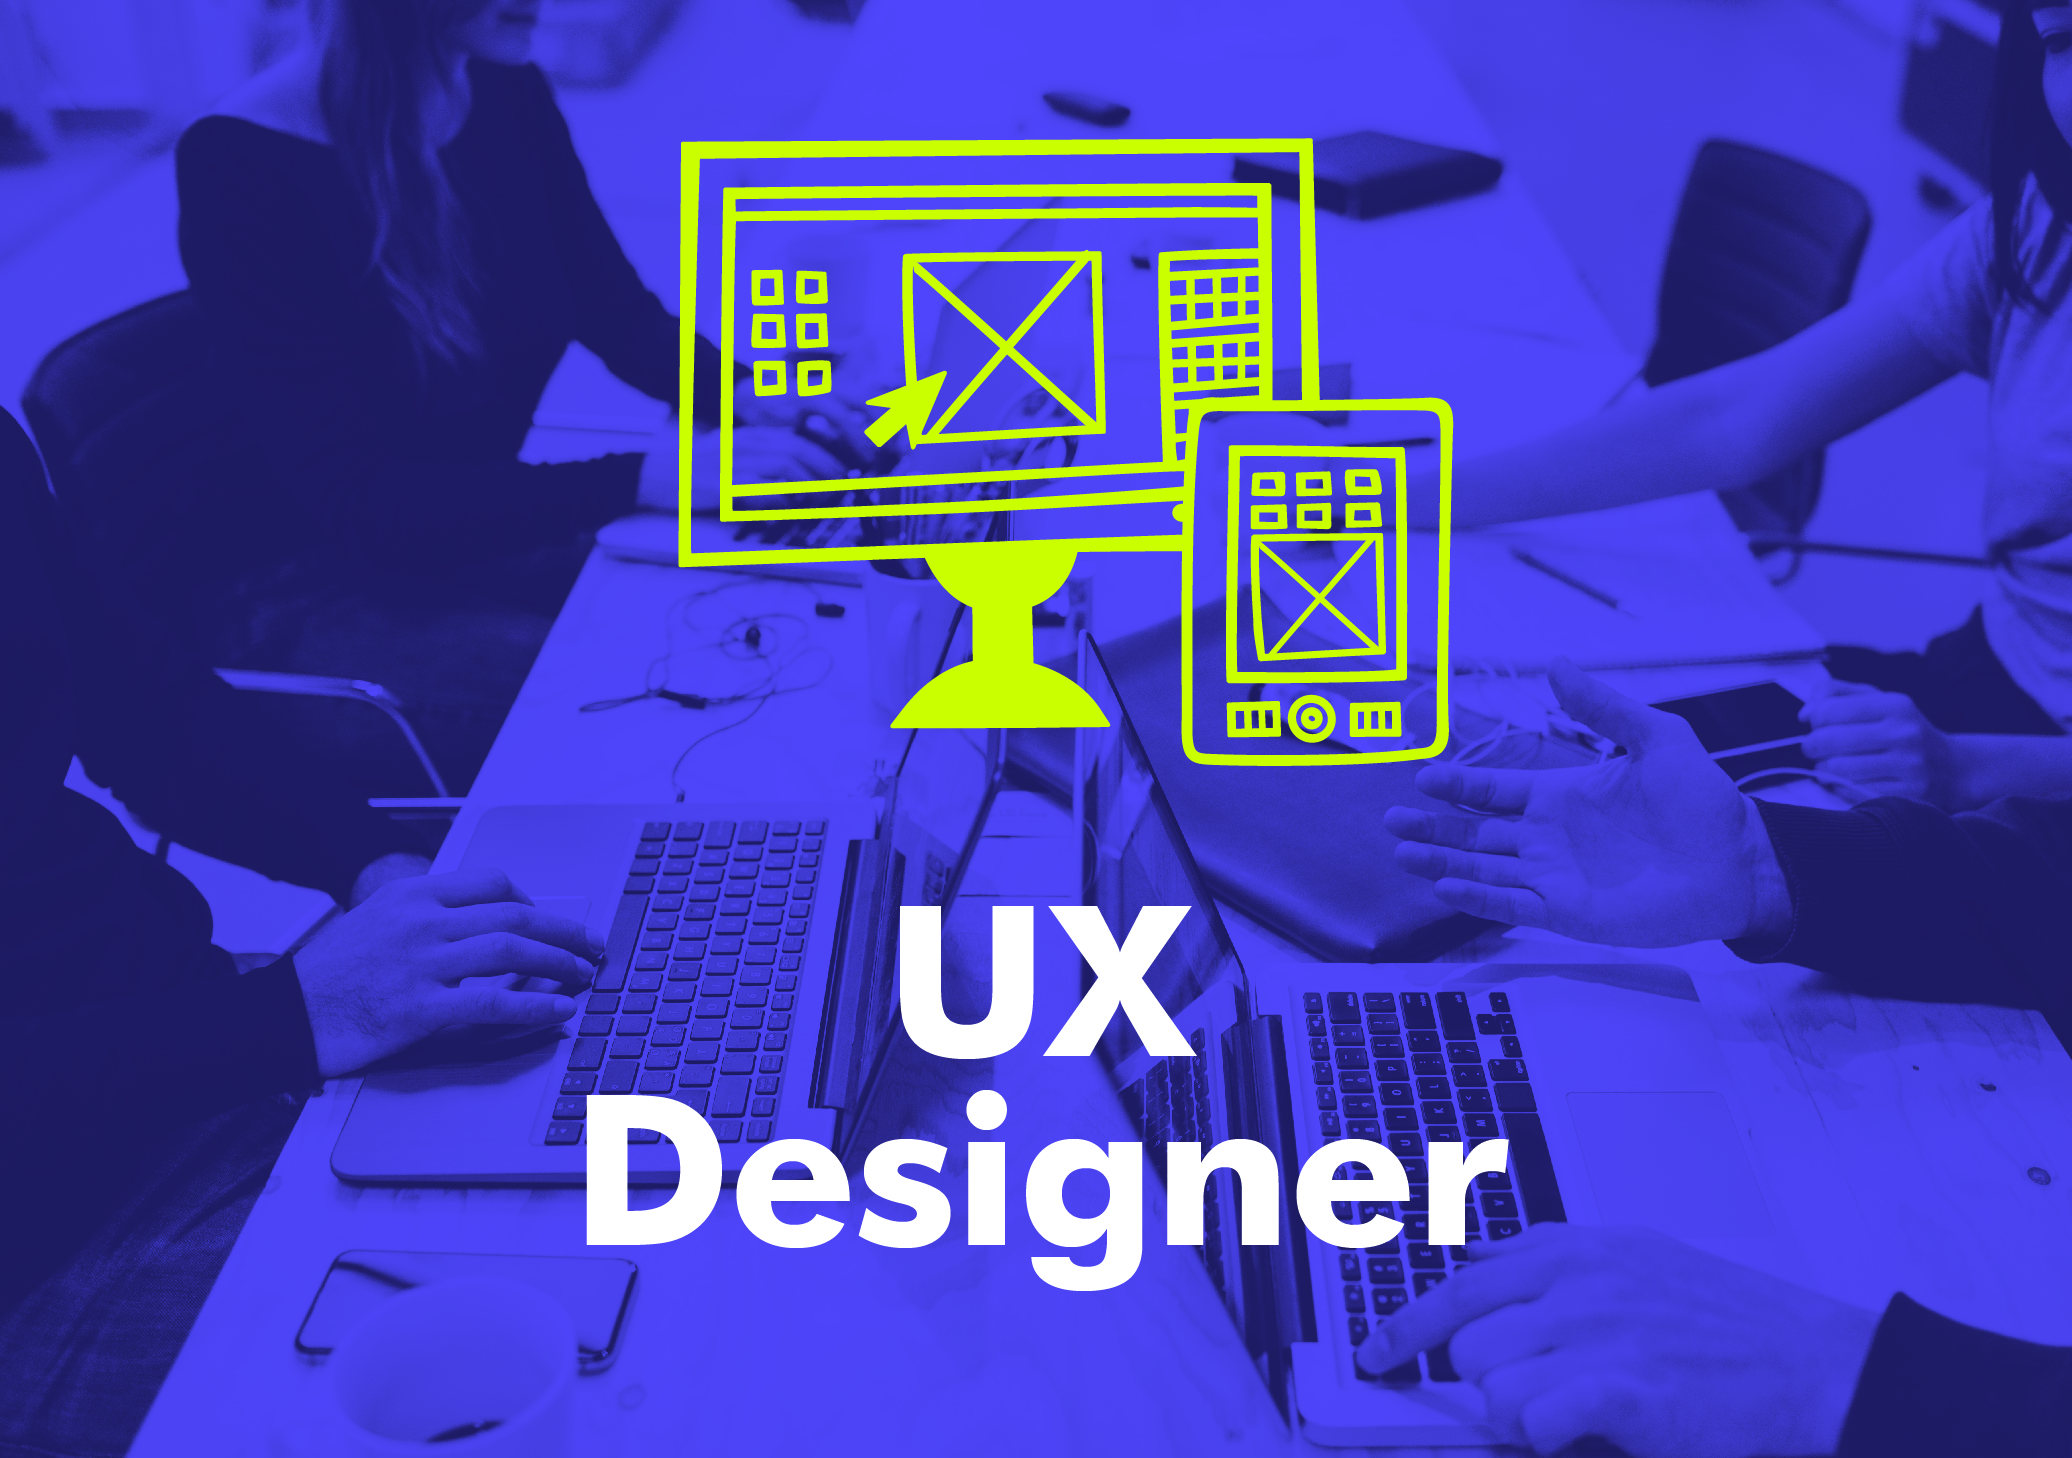 What Are The Roles, Responsibilities, And Tasks Of A UX Designer